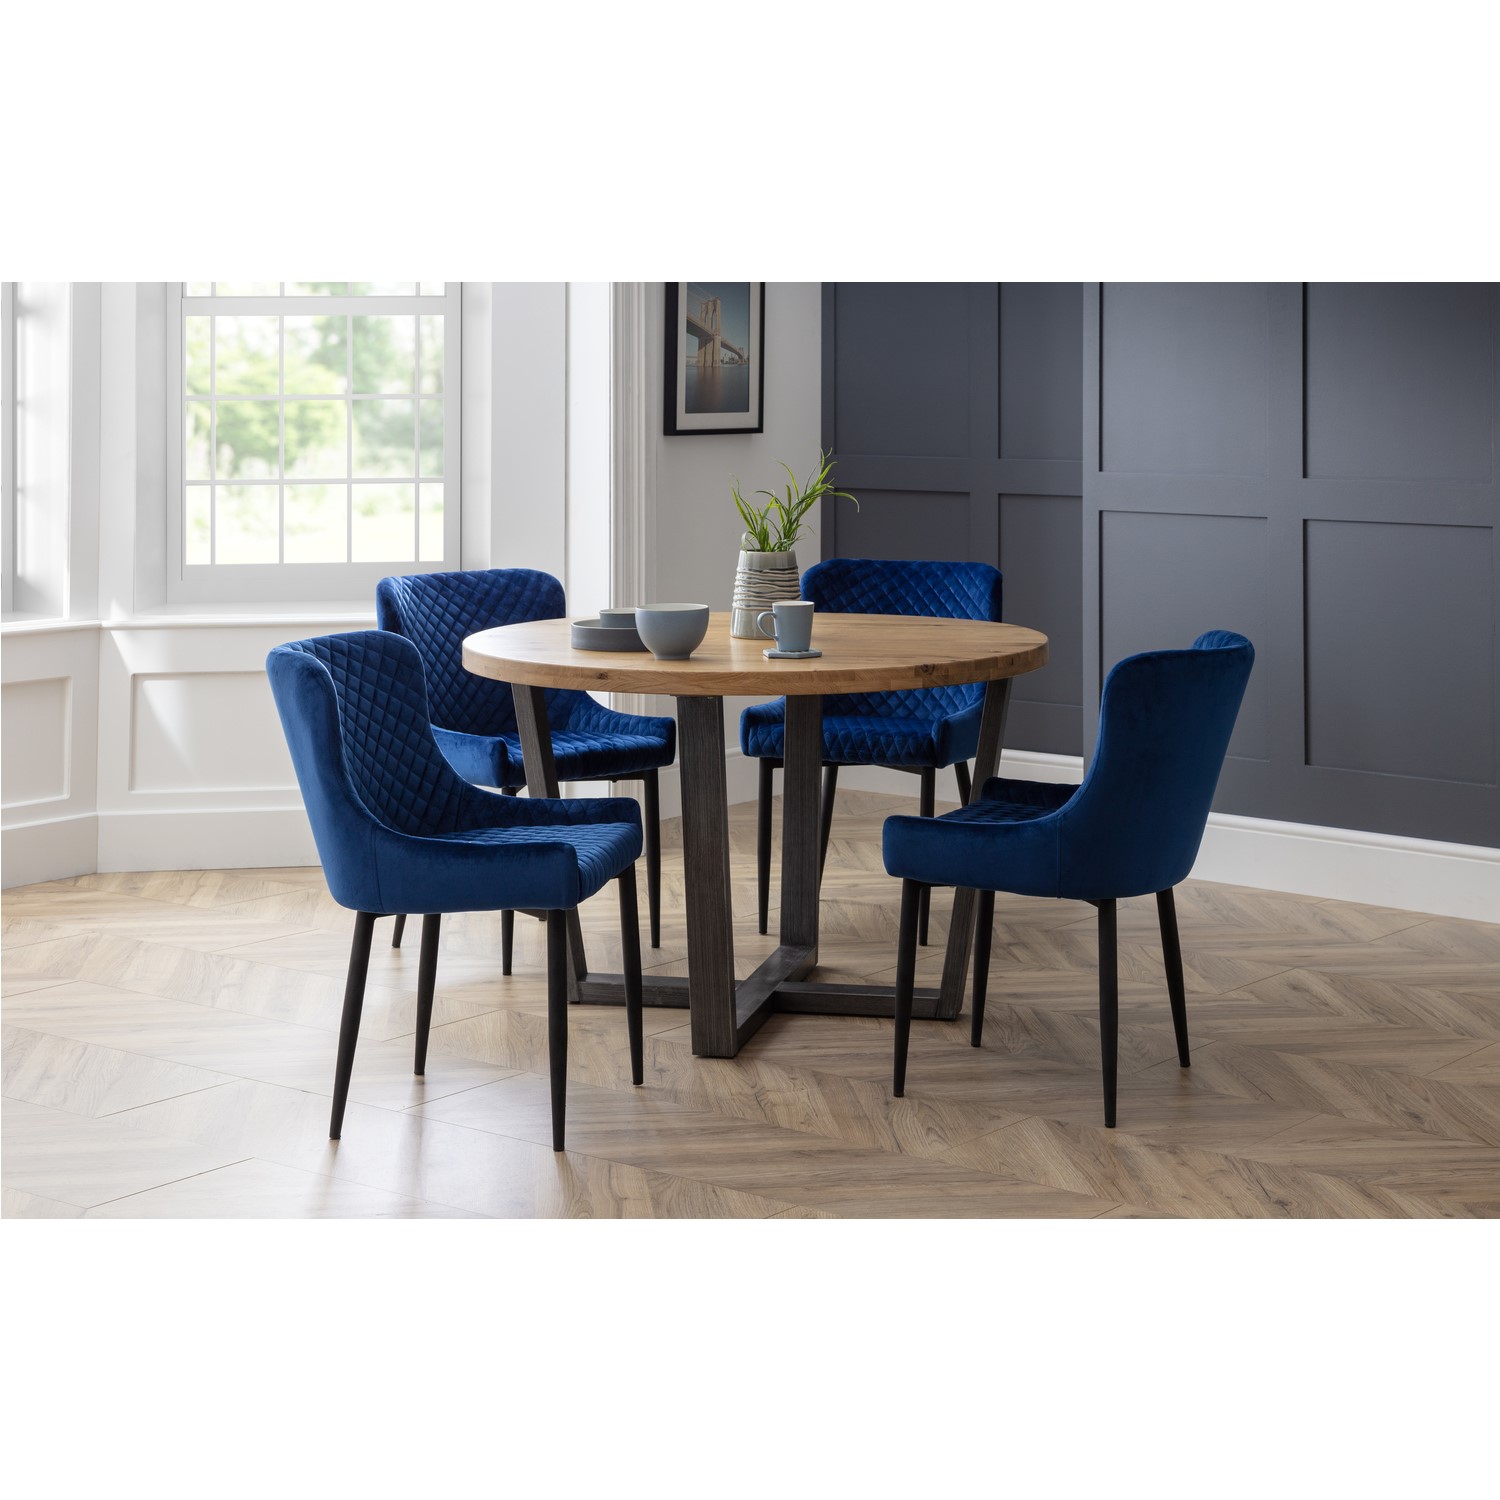 Set Of 4 Blue Dining Chairs, Navy Blue Dining Chairs Set Of 4